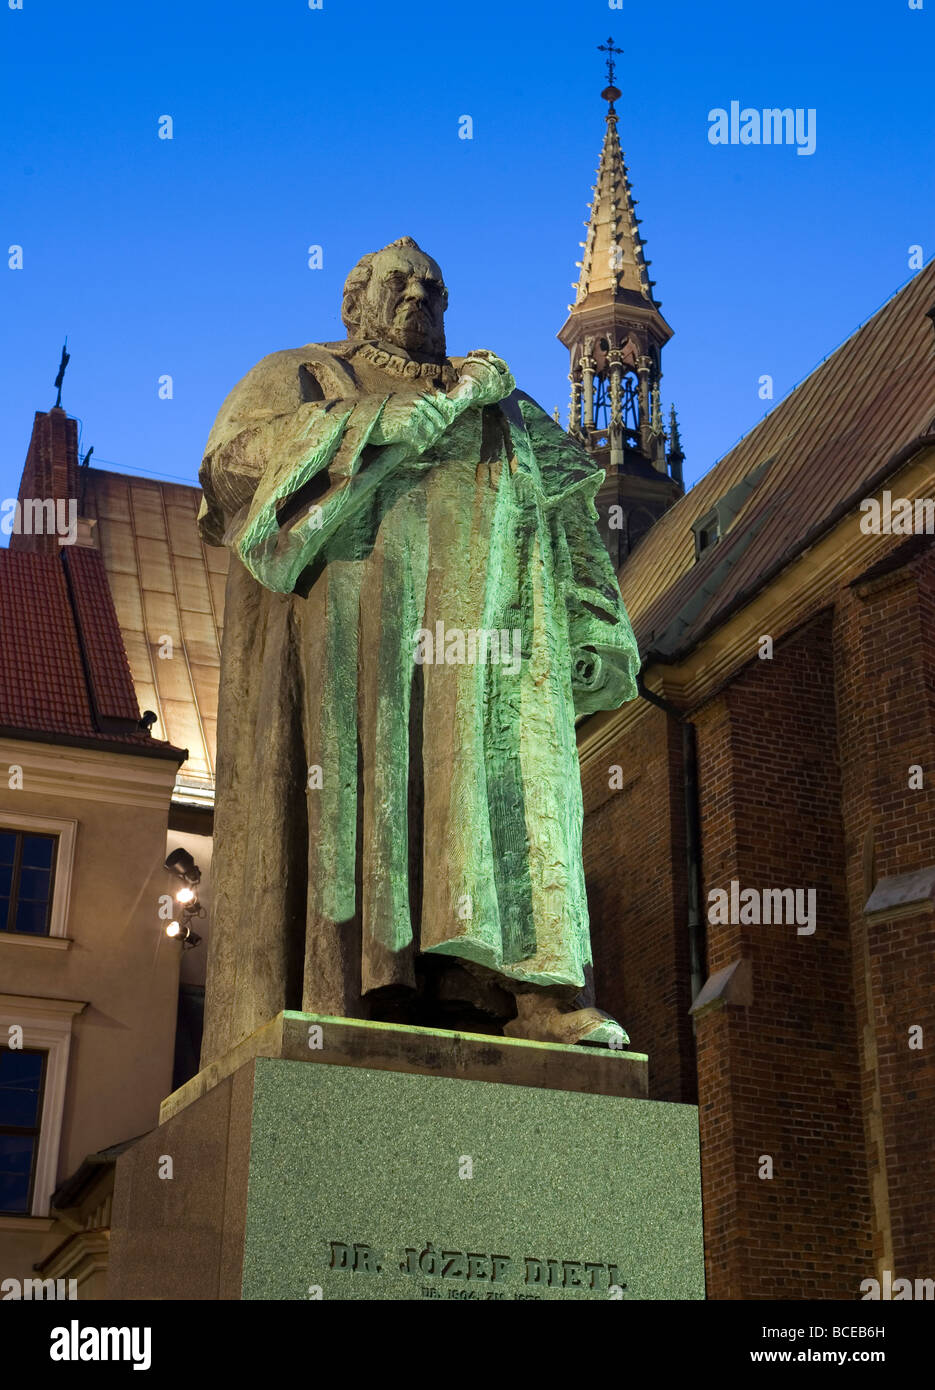 Poland Krakow Statue of Josef Dietl in front of Franciscan church Stock Photo